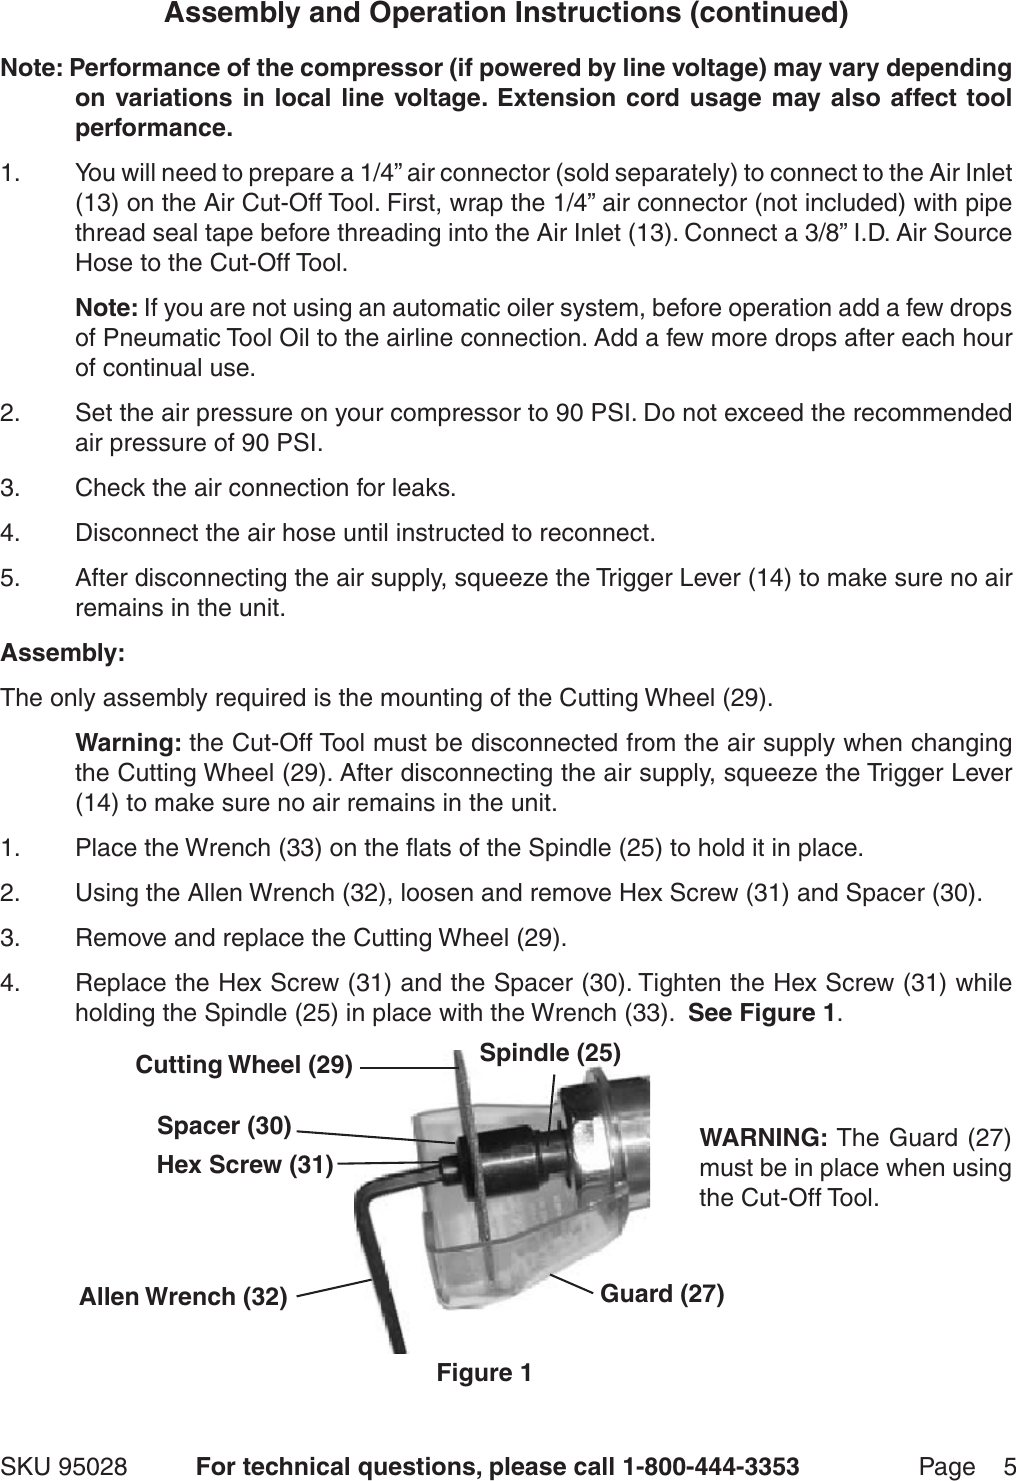 Page 5 of 8 - Harbor-Freight Harbor-Freight-95028-Users-Manual-  Harbor-freight-95028-users-manual